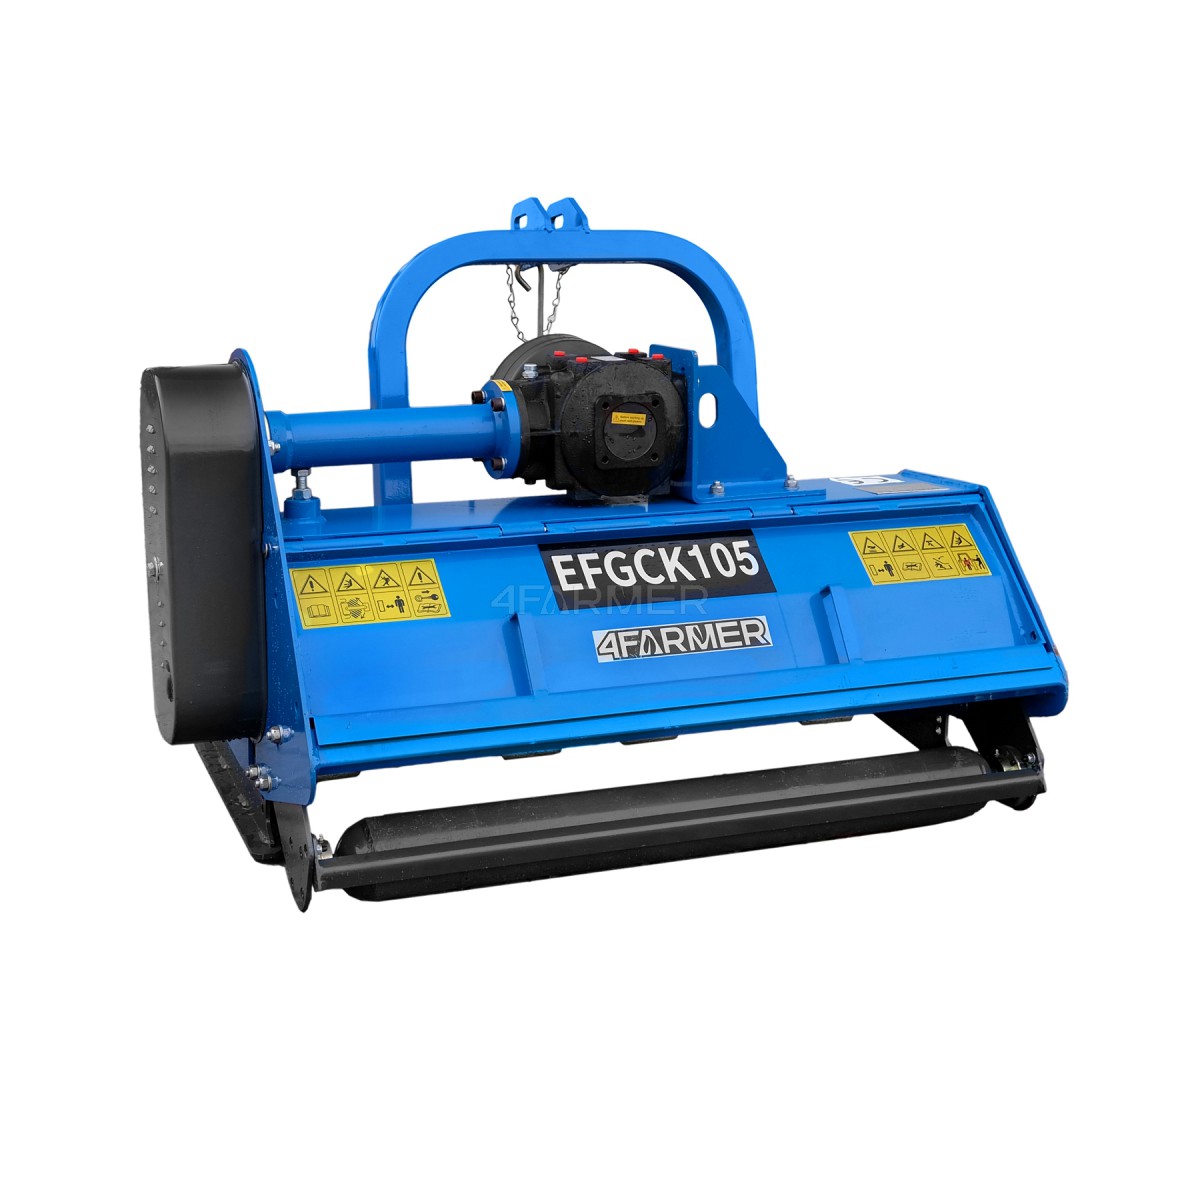 EFGC-K 105 flail mower with opening flap 4FARMER - blue